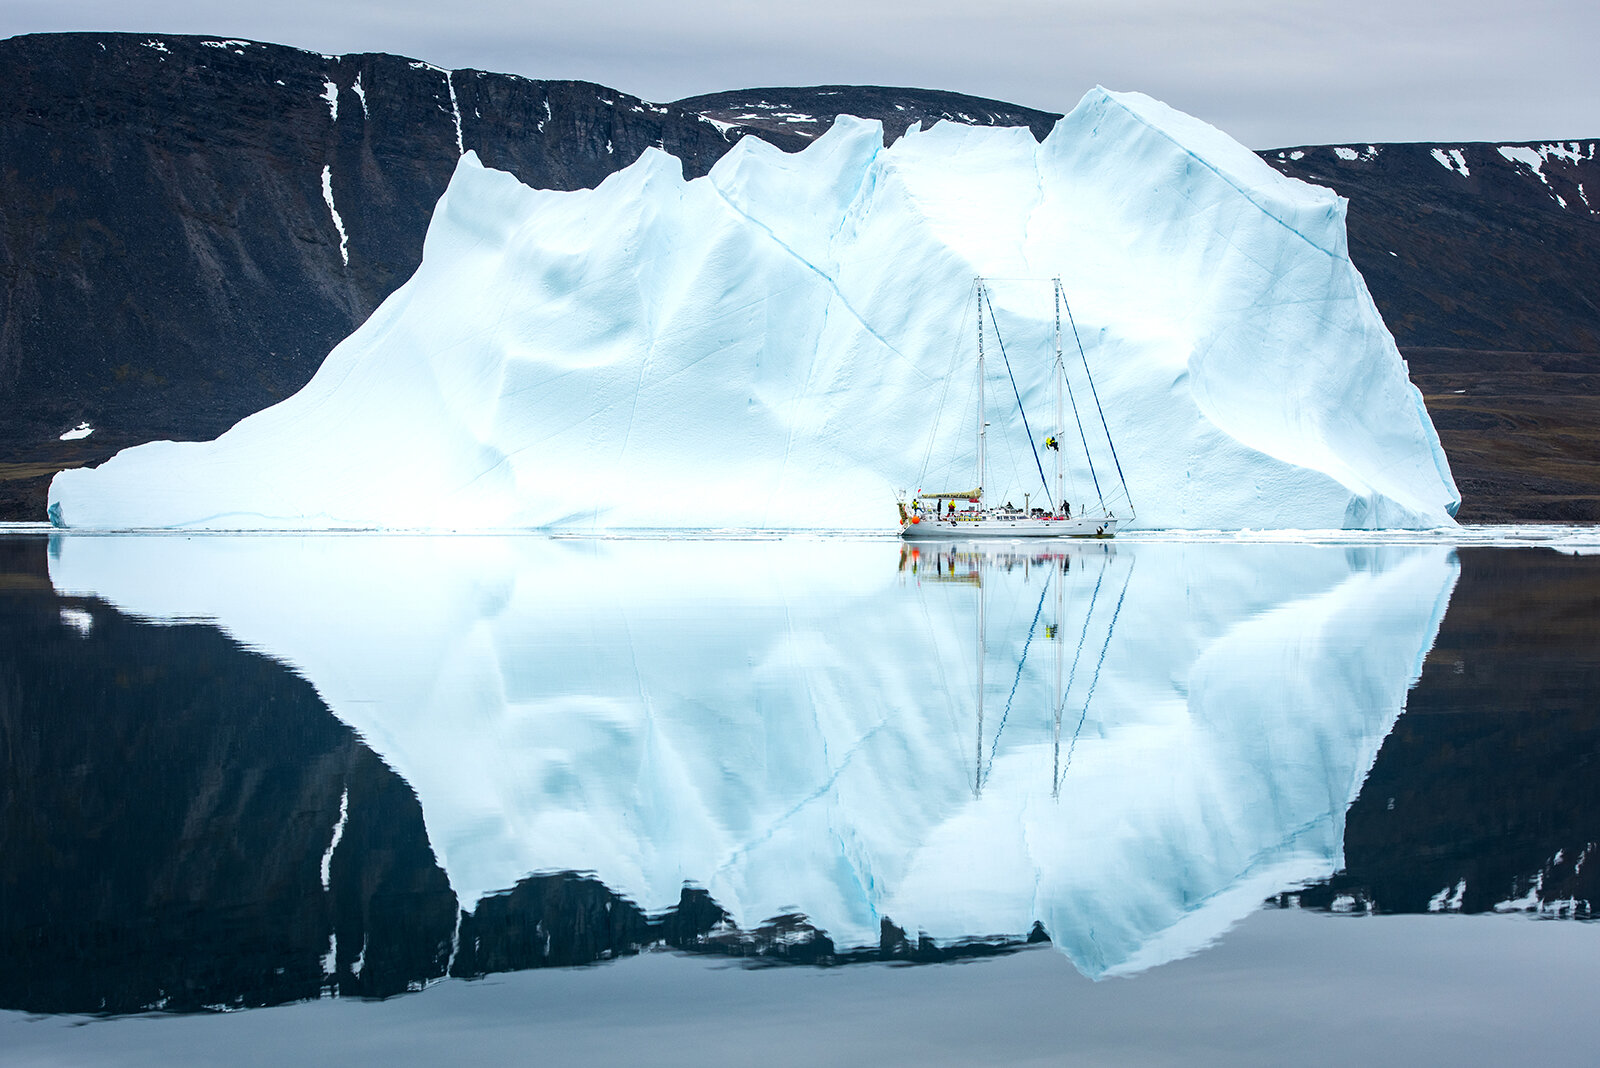 Expedition boat passing by a giant iceberg